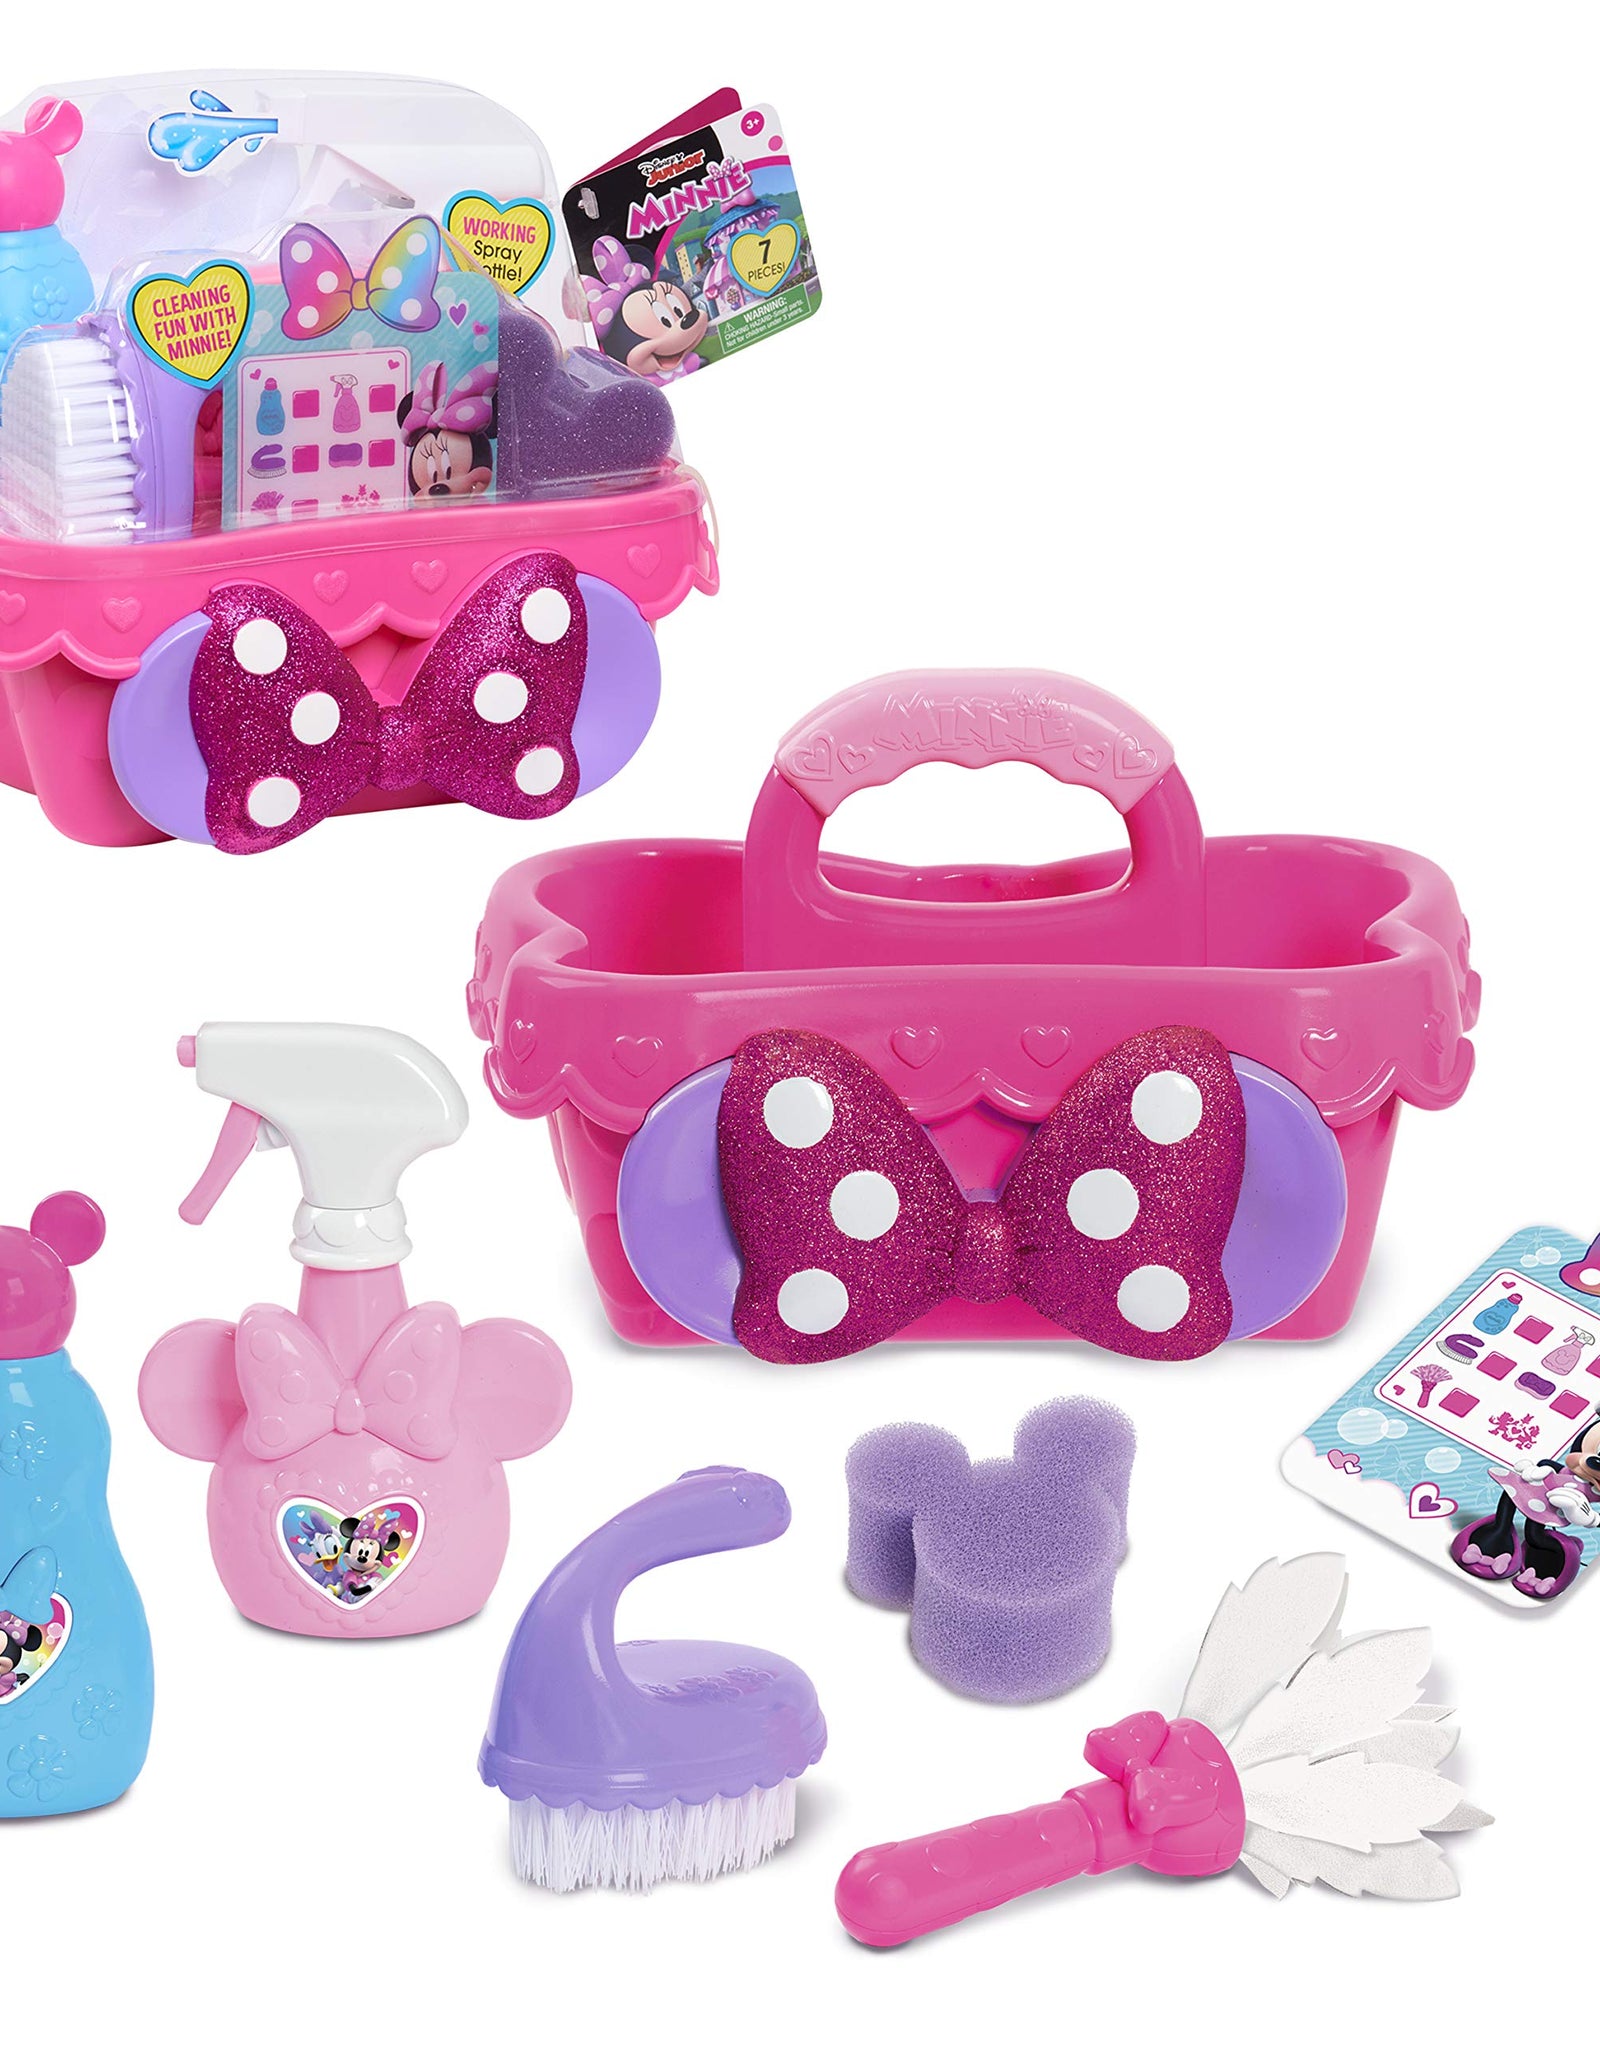 Minnie's Happy Helpers Sparkle N' Clean Caddy, by Just Play